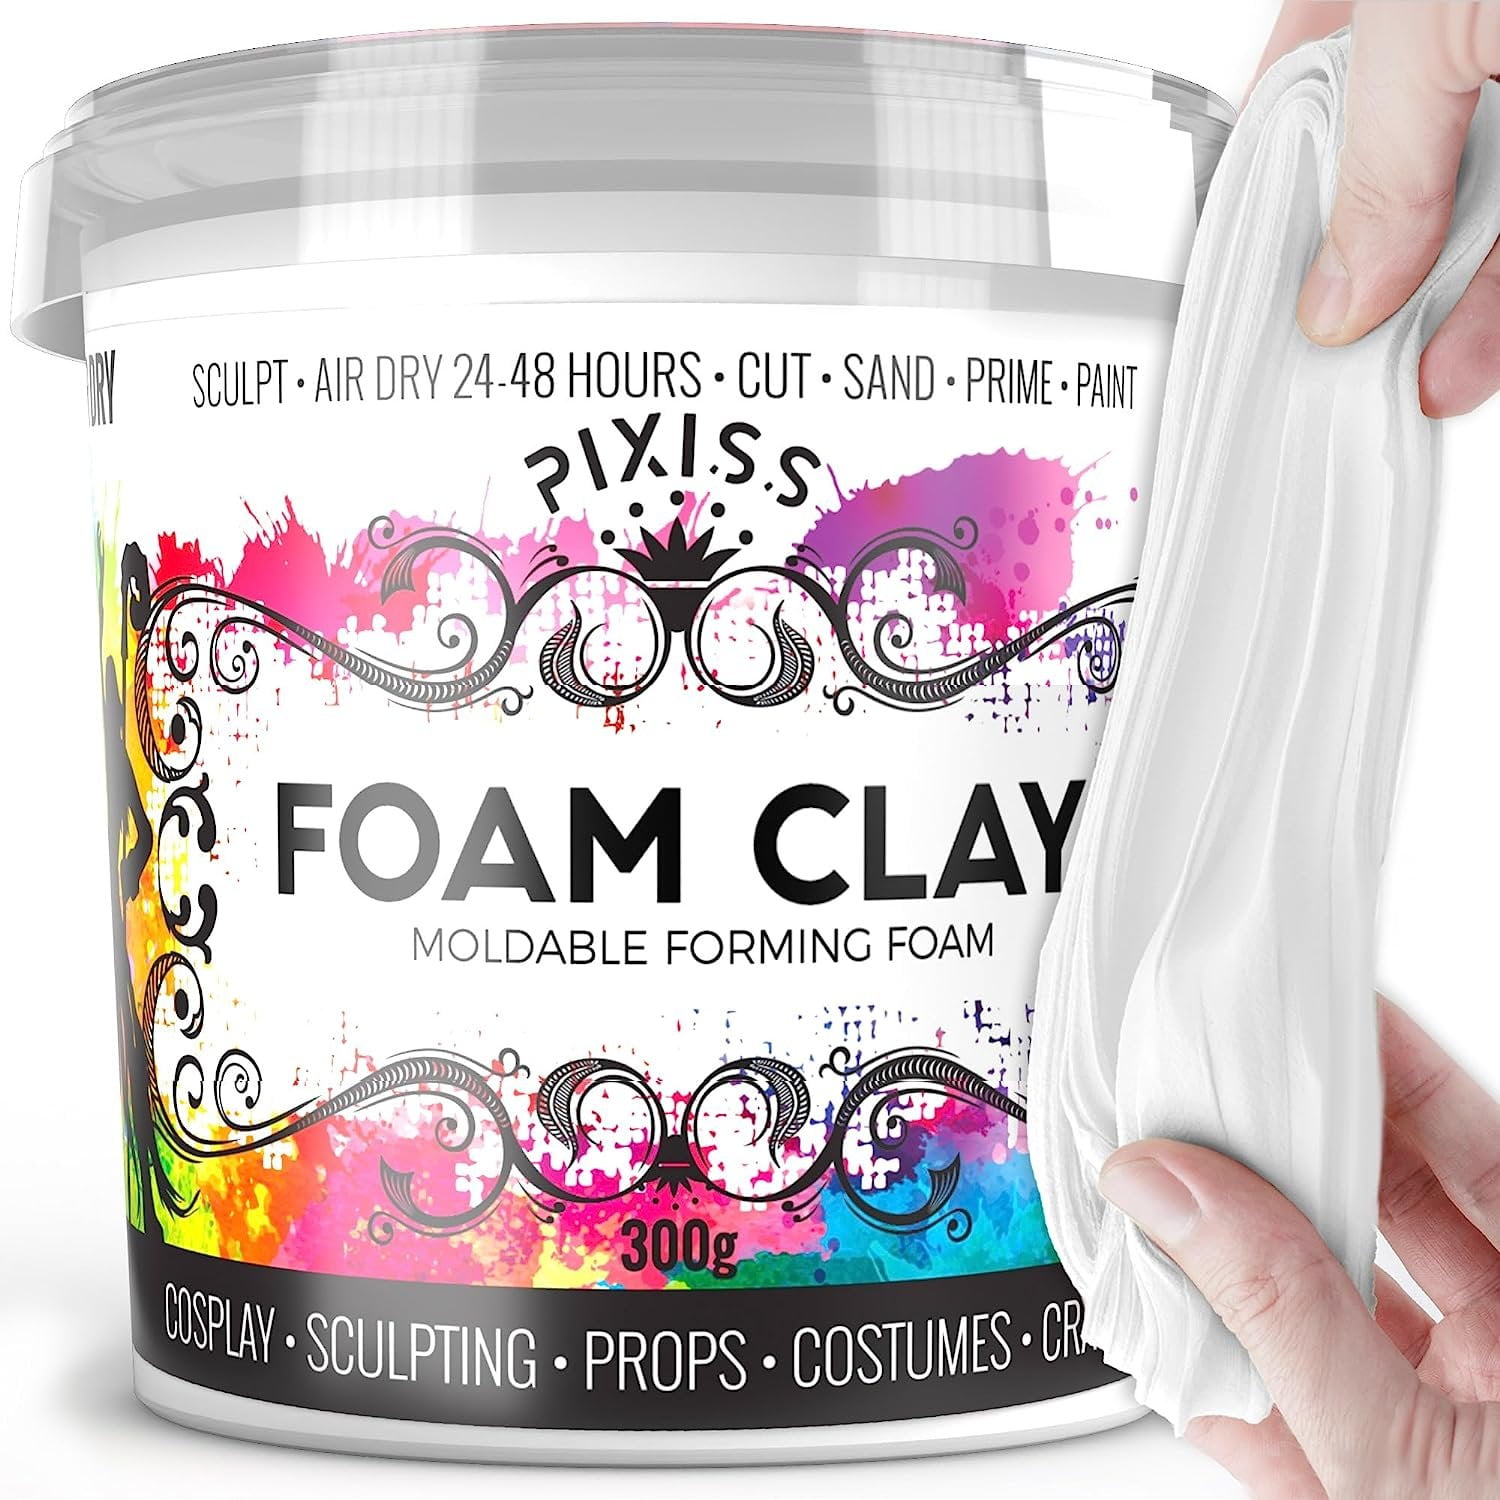 Moldable Cosplay Foam Clay (Black) 300g - by The Foamory - High Density -  Air Dries Like EVA Foam, Light Weight, Sands and Paints Easily, Non-Toxic 